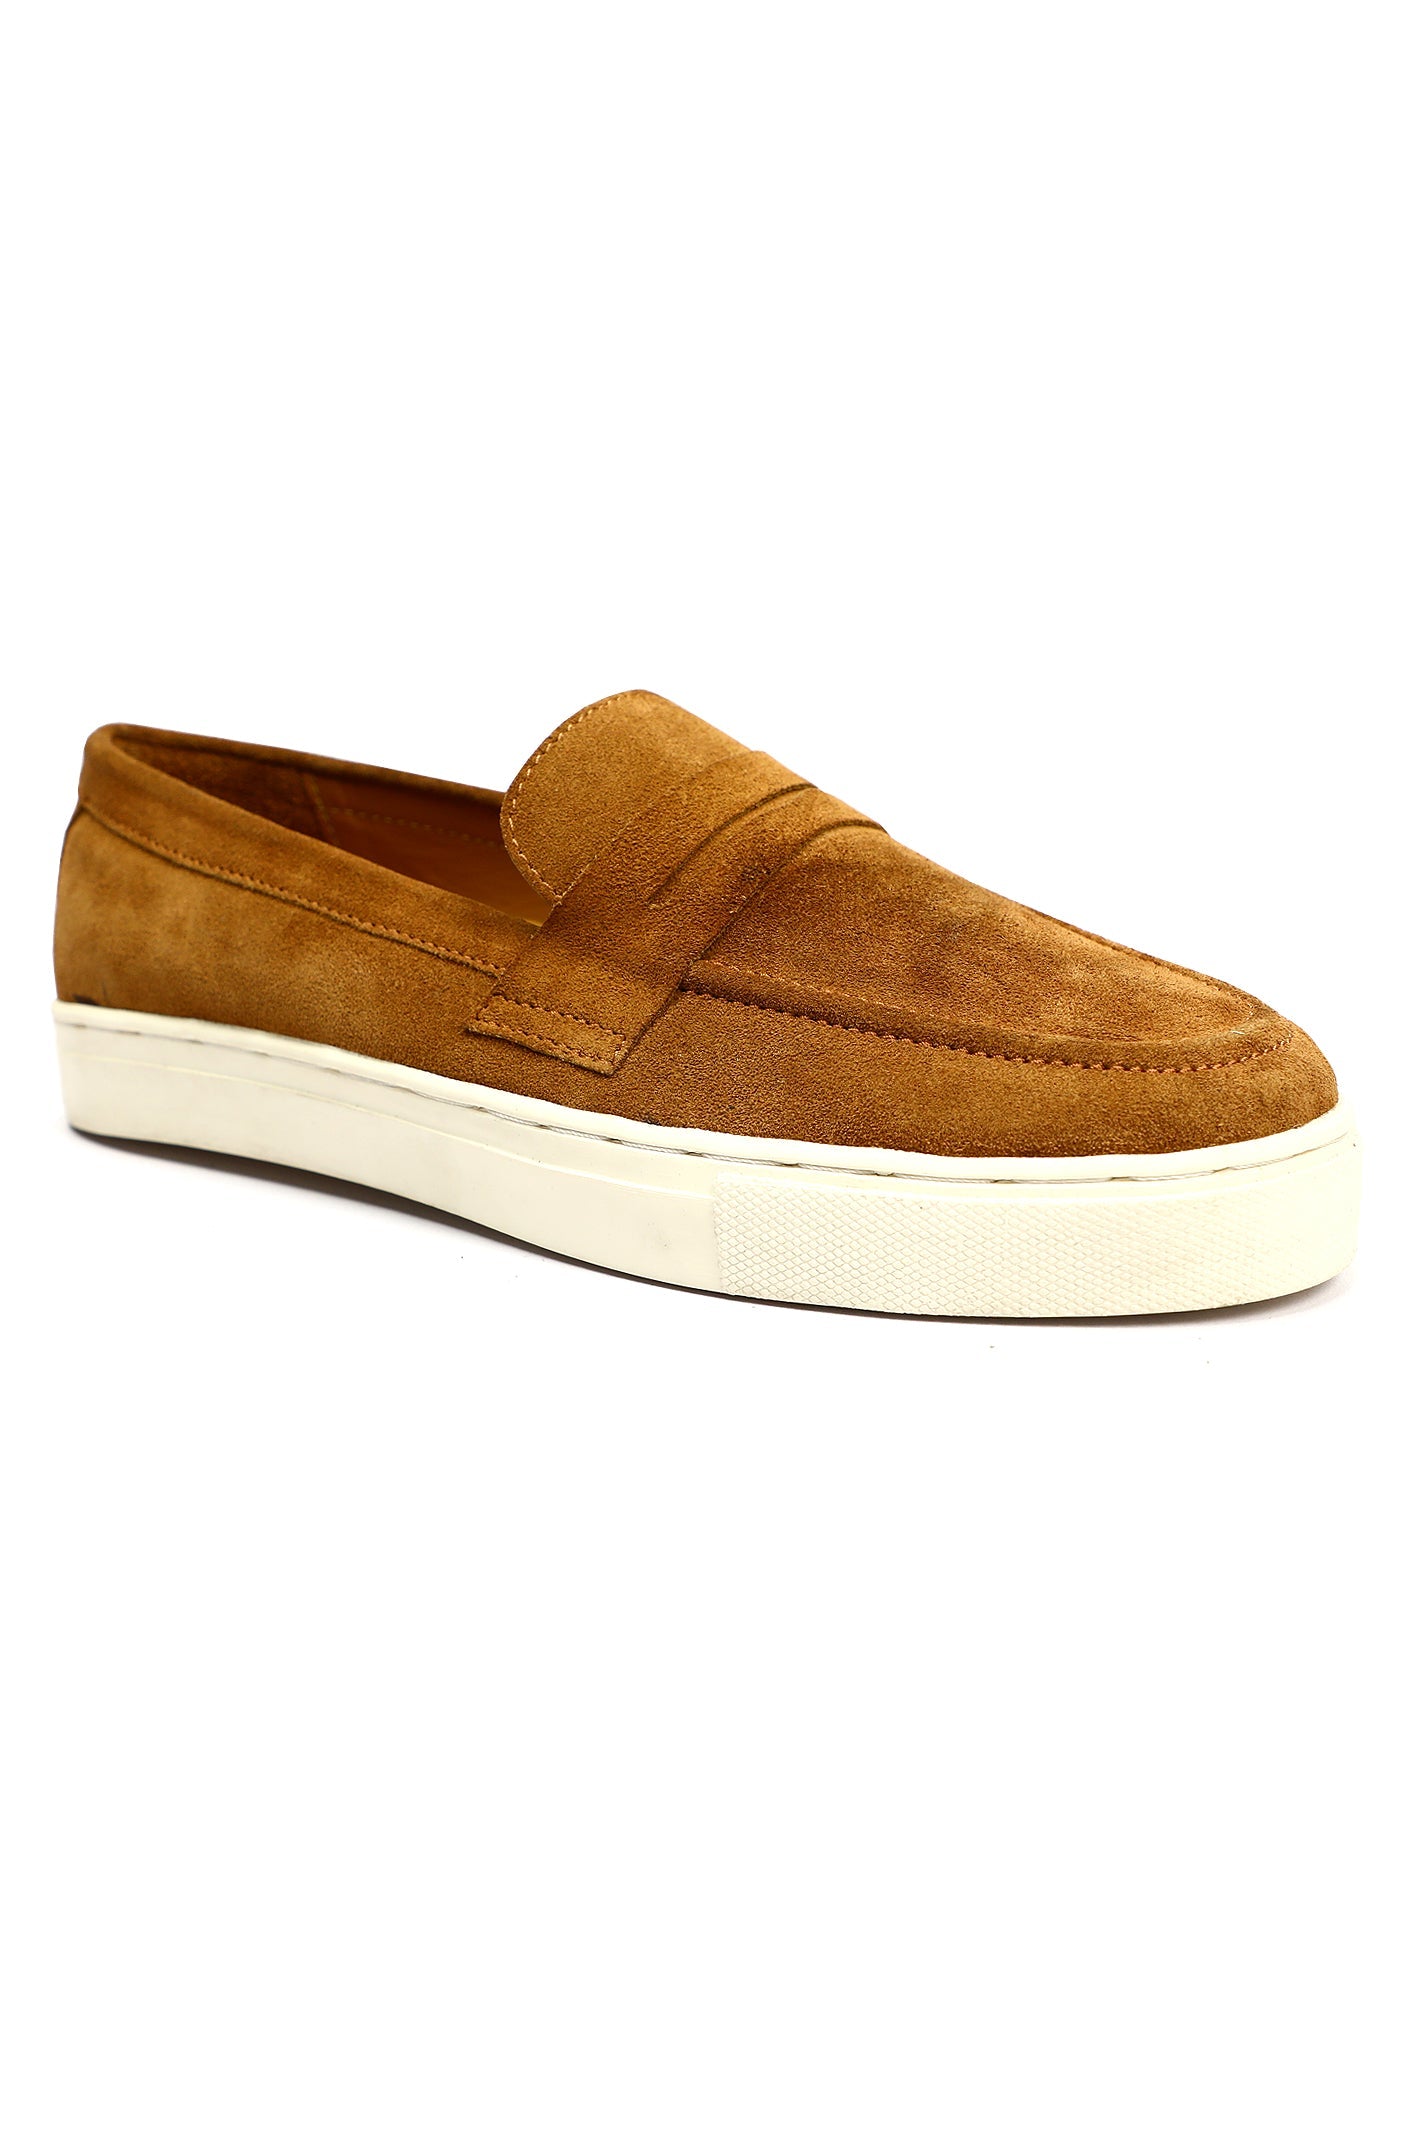 Casual Shoes For Men SKU: SMC-0086-CAMEL - Diners